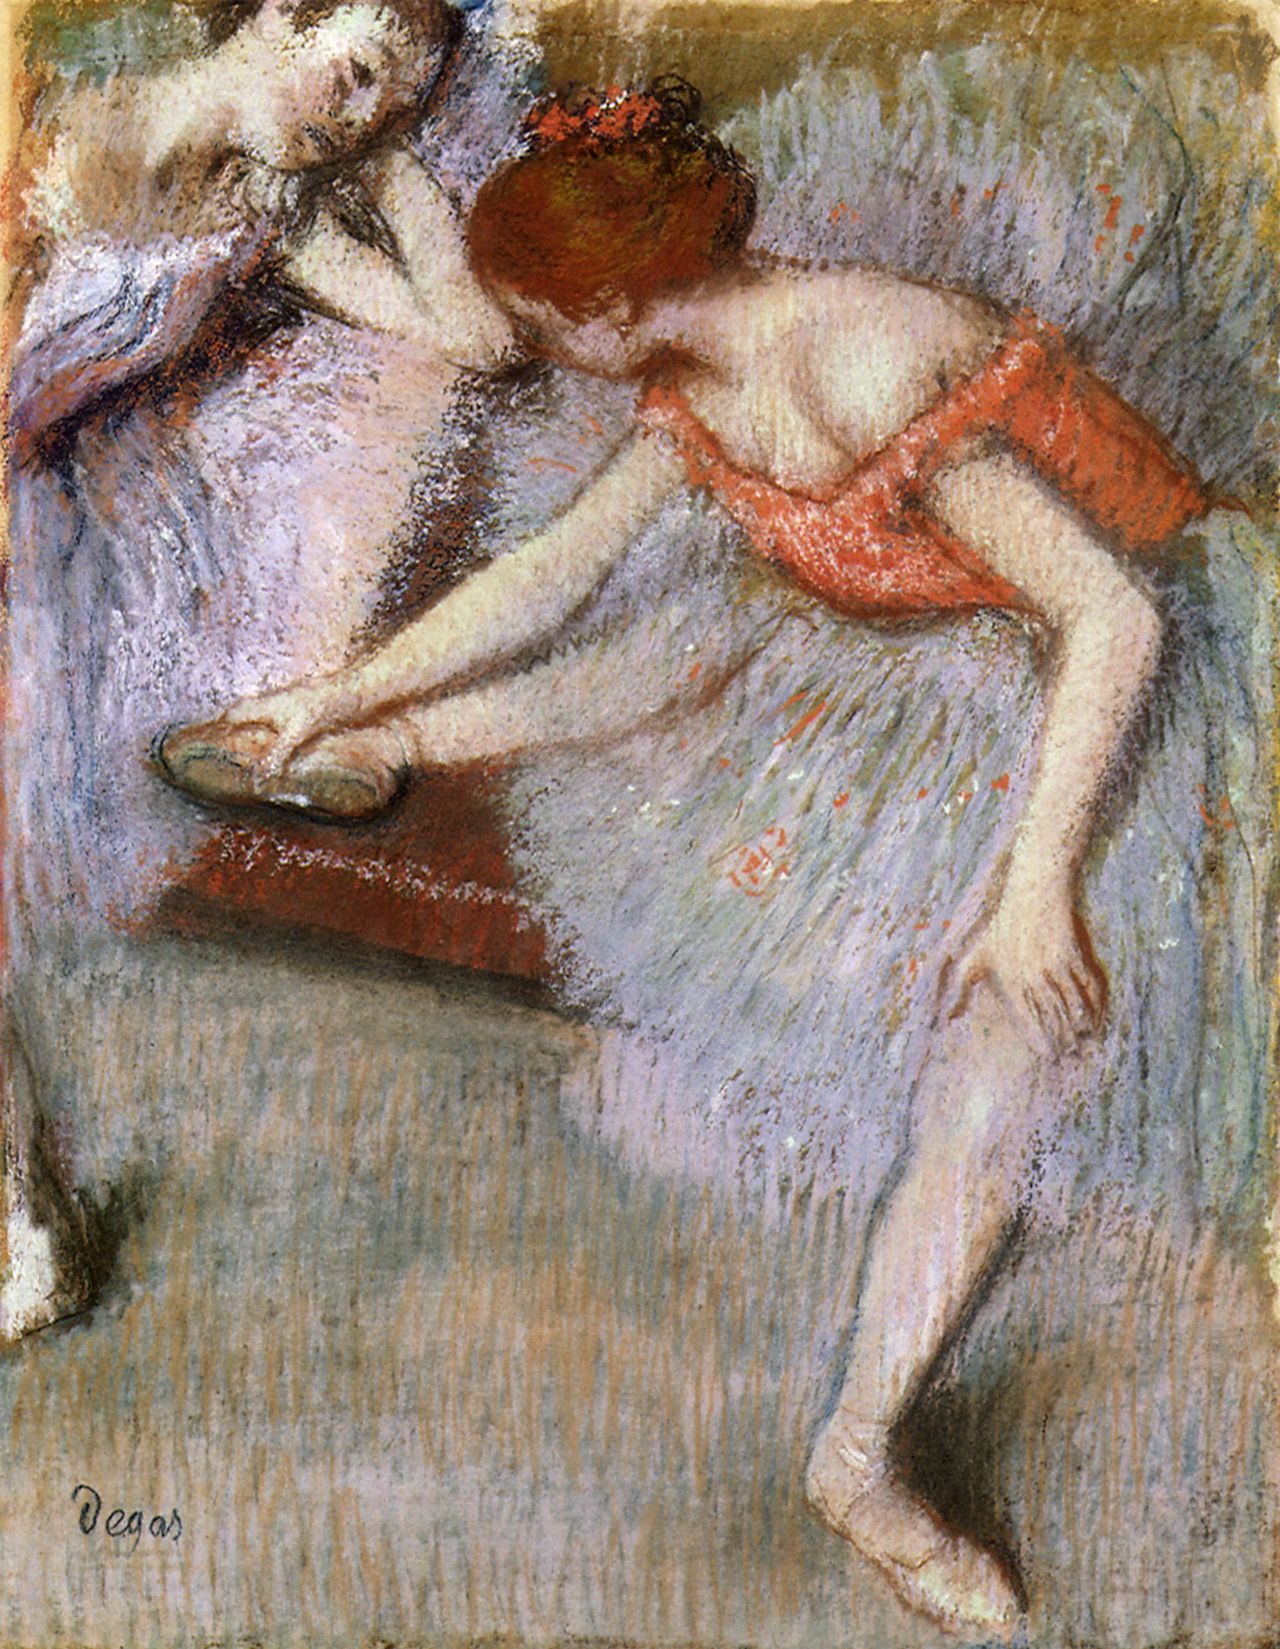 As an adult, Degas fraternized with few women aside from his housekeepers. His friends believed he feared women would interfere with the quality of his work.